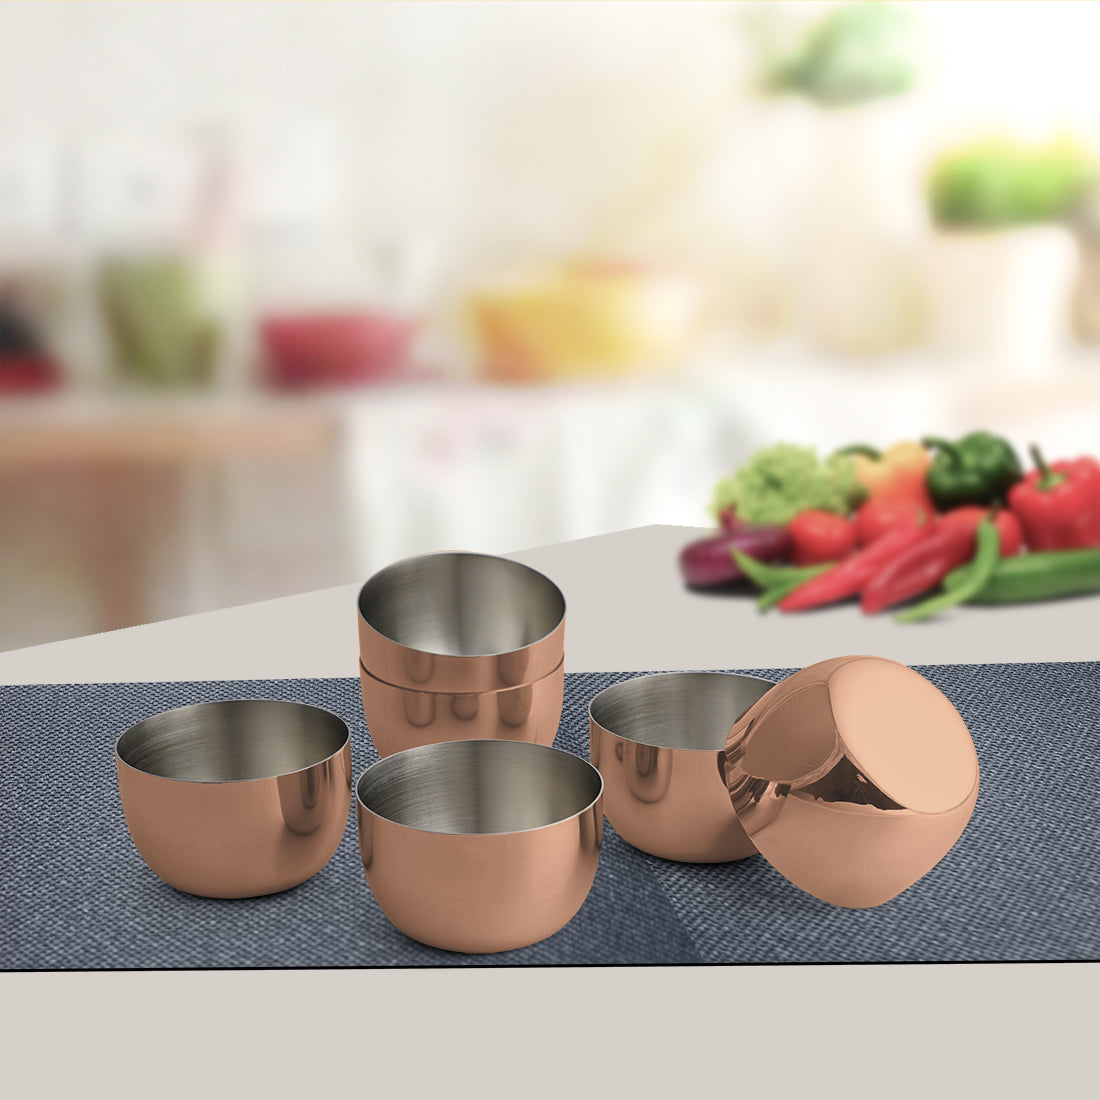 Stainless Steel 6 PCS Small Bowl with Rose Gold PVD Coating Majestic